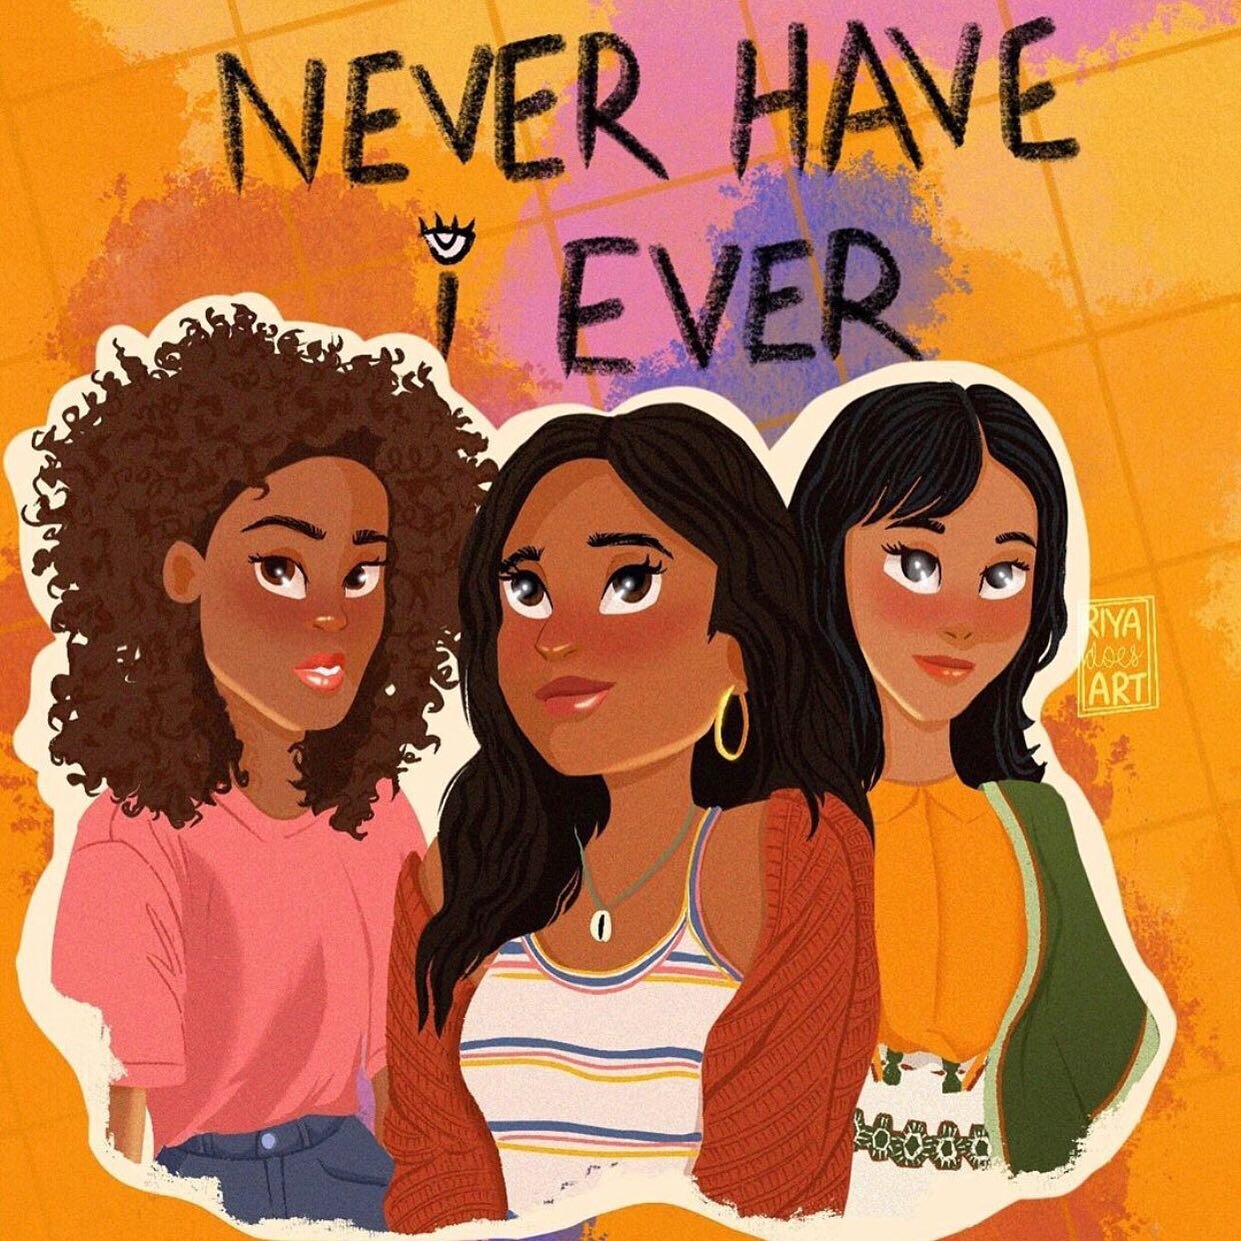 Never Have We Ever... seen so much diversity on screen! 
Artwork by @riyadoesart 
Featuring @neverhaveiever 
.
.
.
#productofculture #southasiancreatives #diversity #neverhaveiever #fanart #mindykaling #supportbrowncreatives #netflix #representation